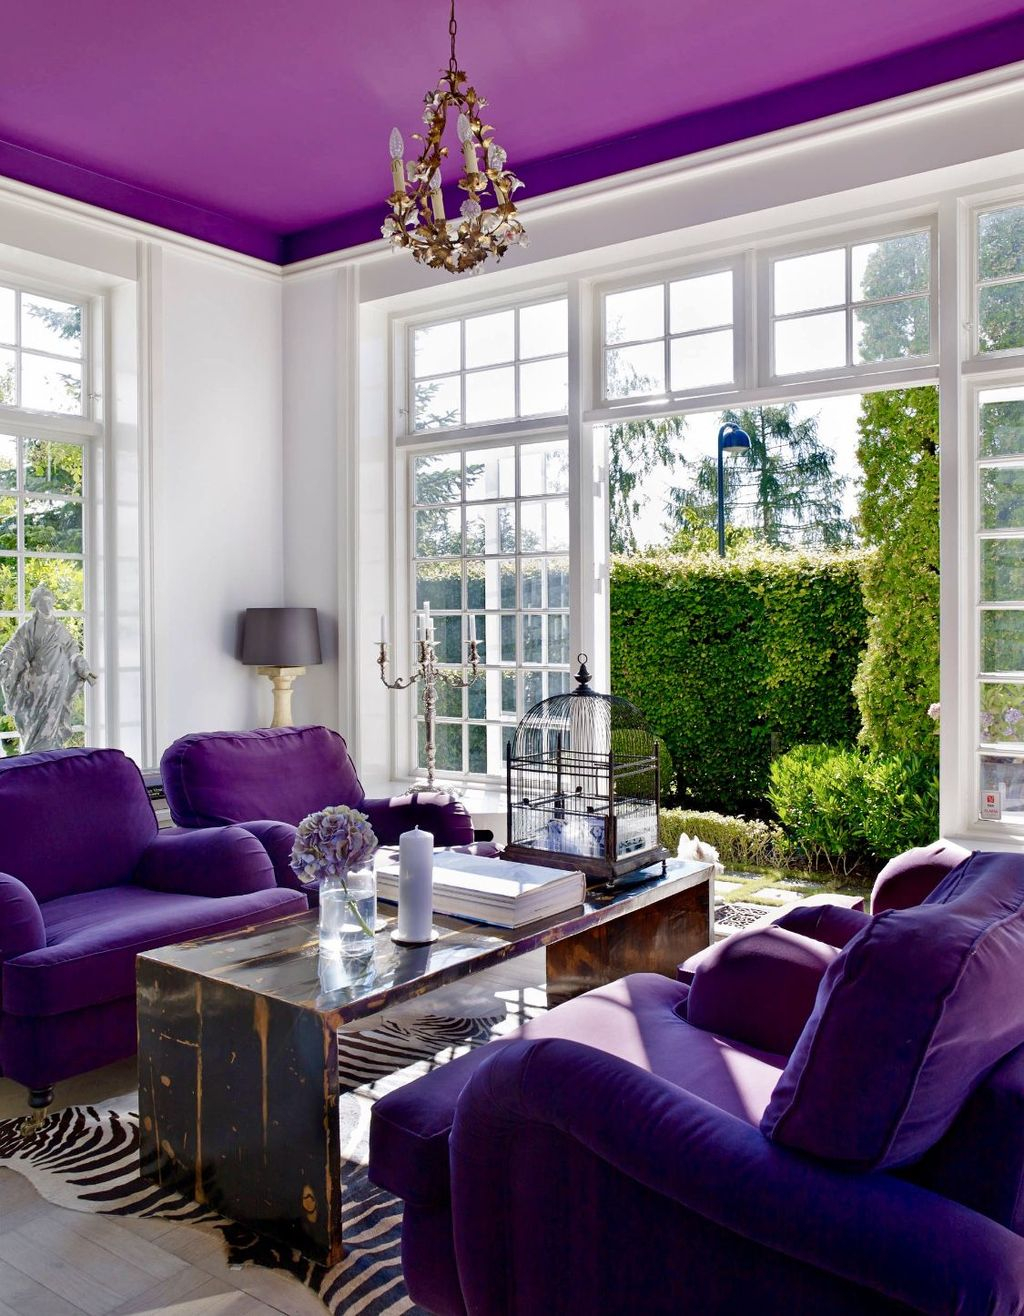 Awesome Living Room Green And Purple Interior Color Ideas10